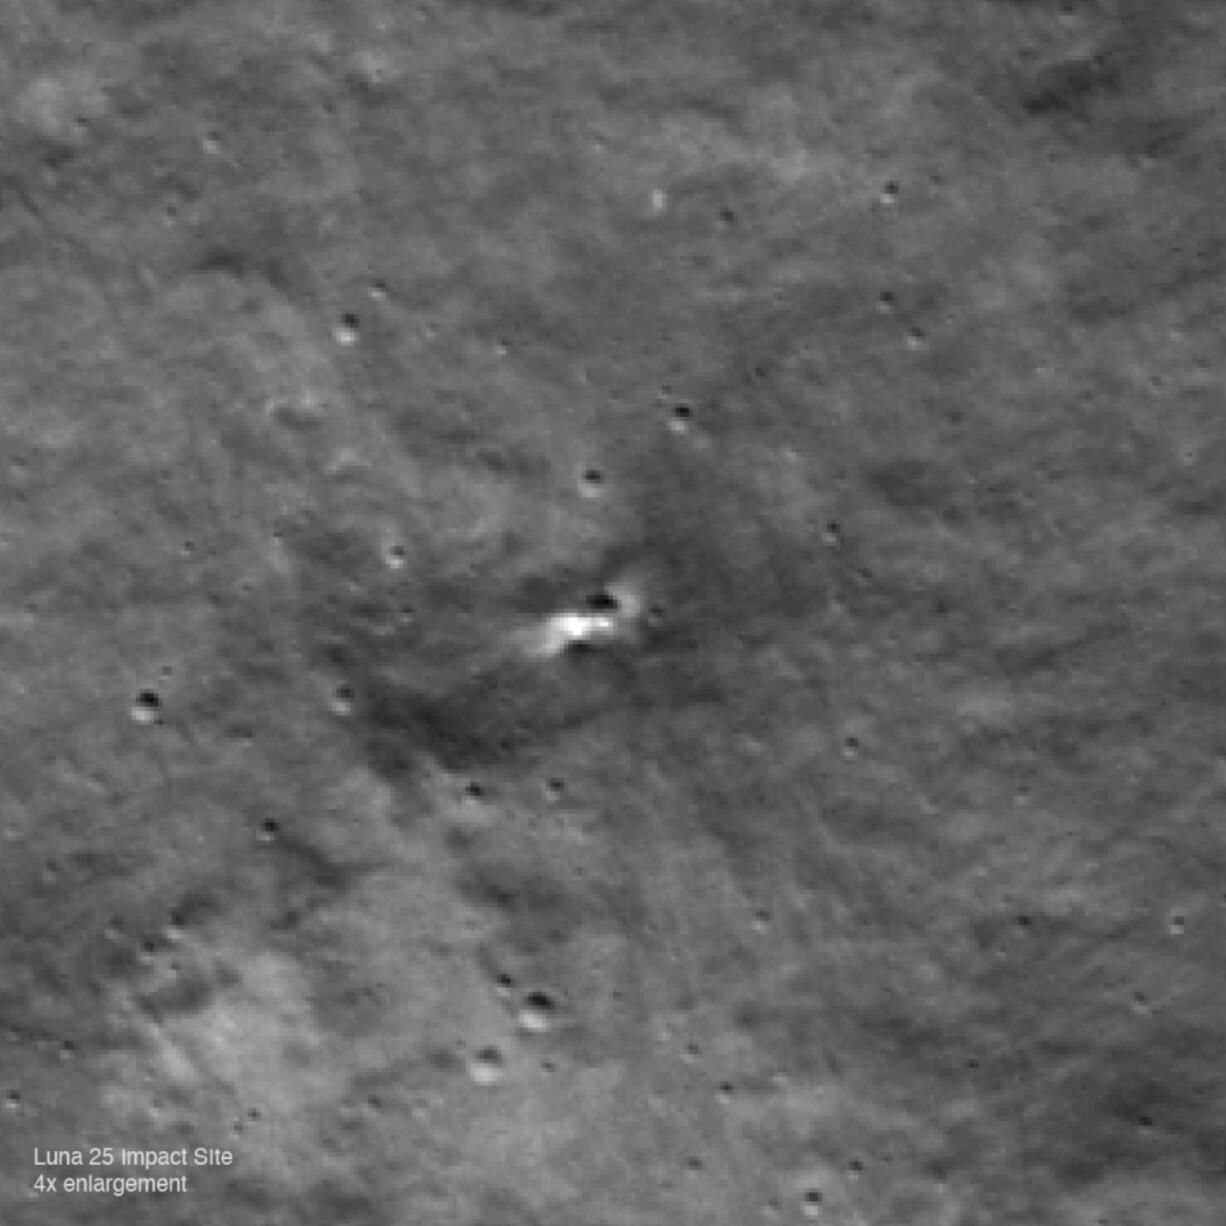 This image provided by NASA's Goddard Space Flight Center/Arizona State University shows an LROC NAC image enlarged four times centered on the likely Luna 25 crater. A NASA spacecraft around the moon has found the likely crash site of Russia's lost lunar lander, Thursday, Aug. 31, 2023. The Luna 25 lander slammed into the moon last month, a harsh end to Russia's first moon mission in almost half a century.